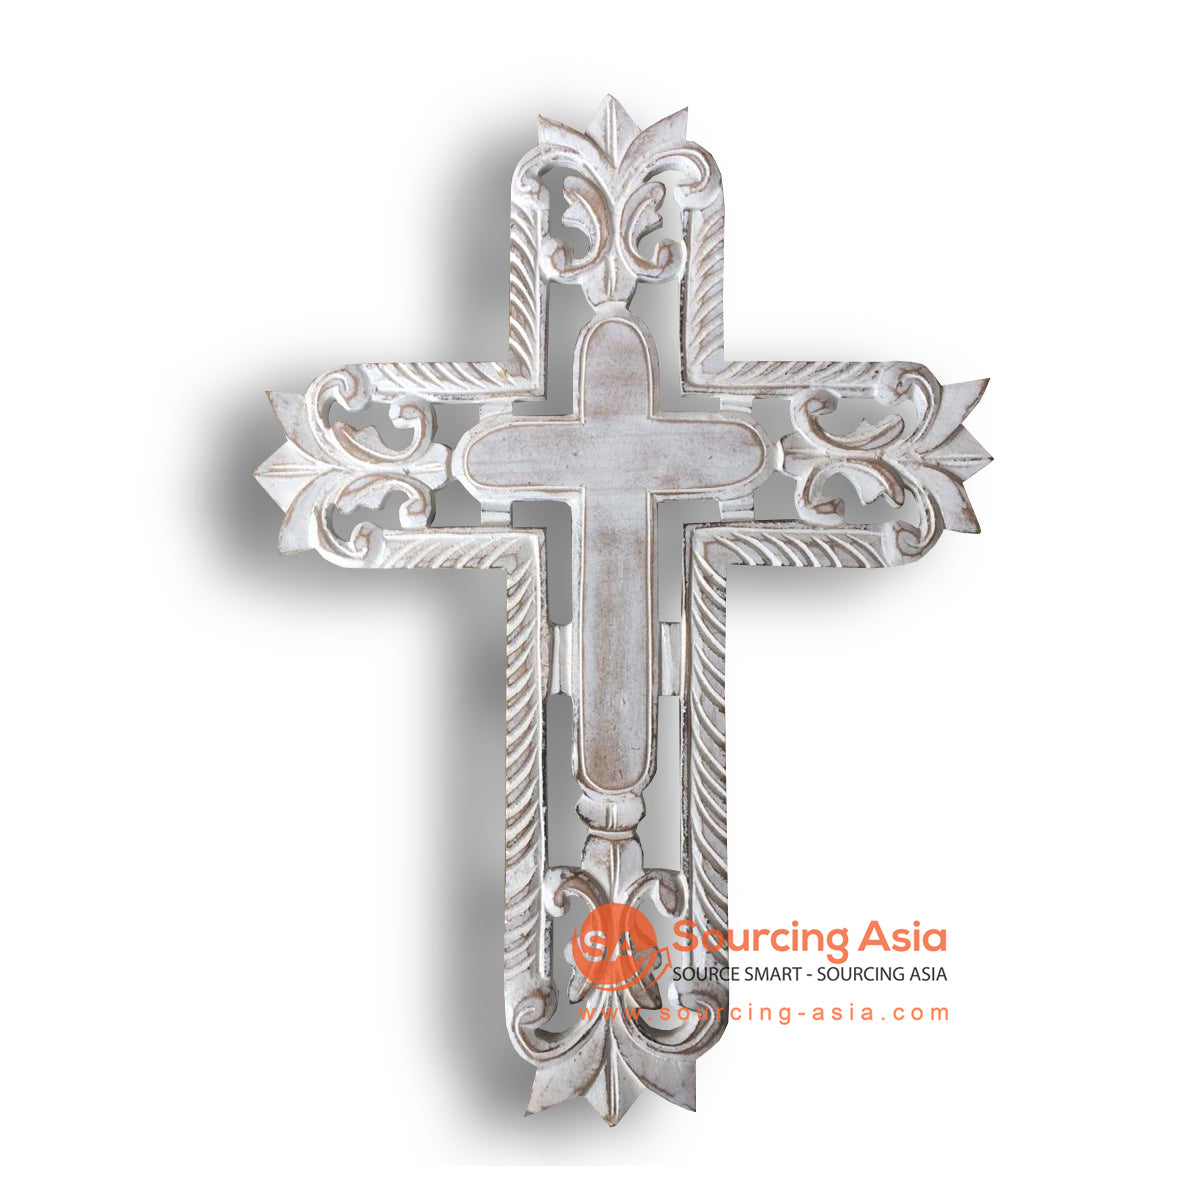 LUH045-2WW WHITE WASH WOODEN CARVED CROSS DECORATION